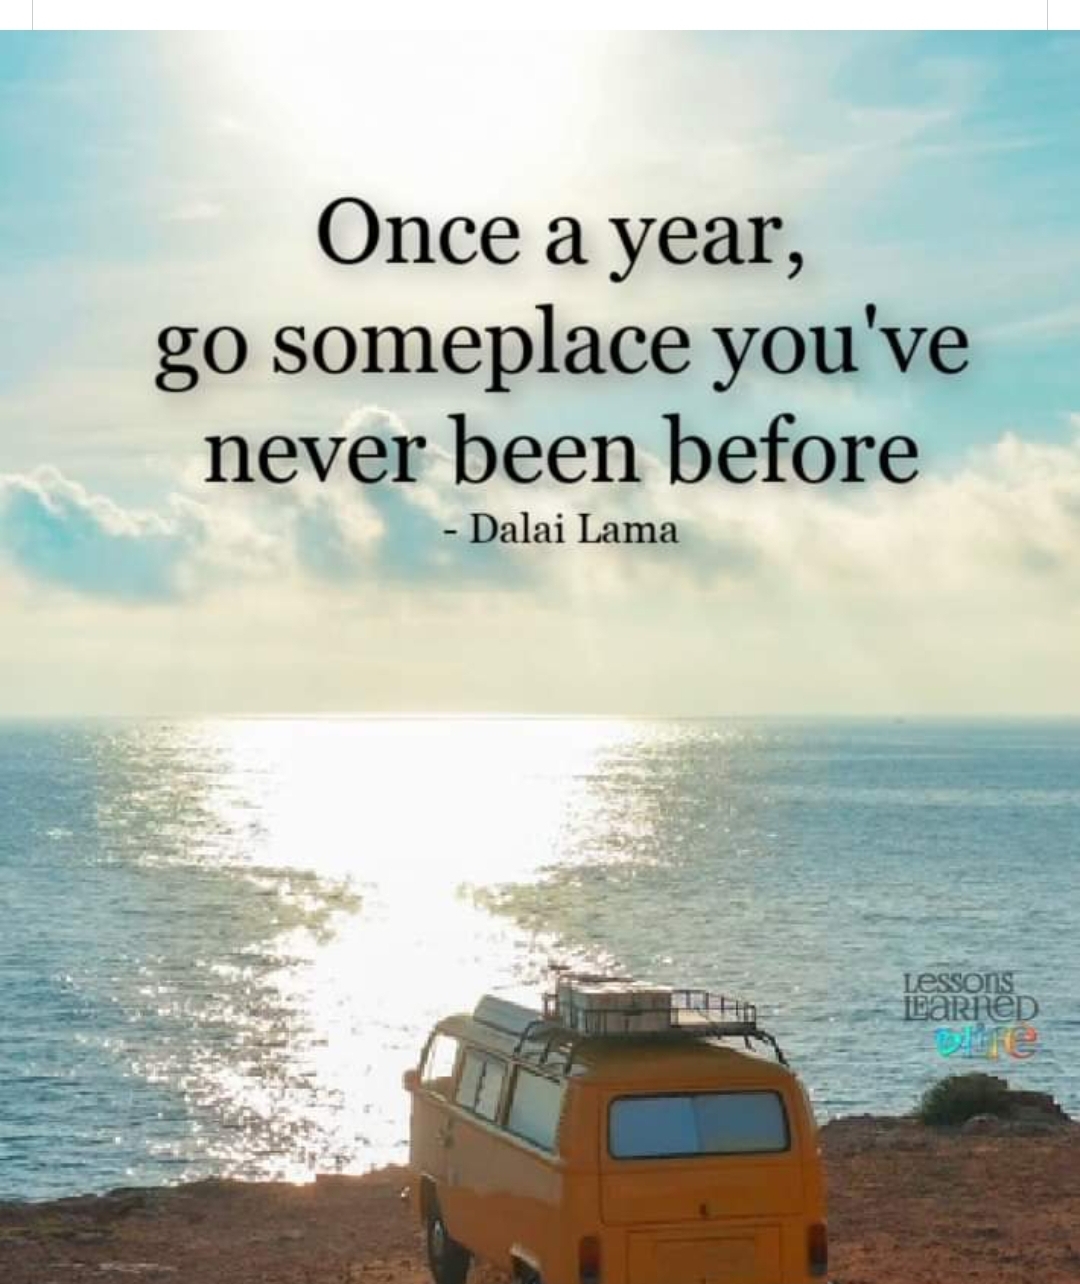 Once a year,
go someplace you've
never been before

- Dalai Lama